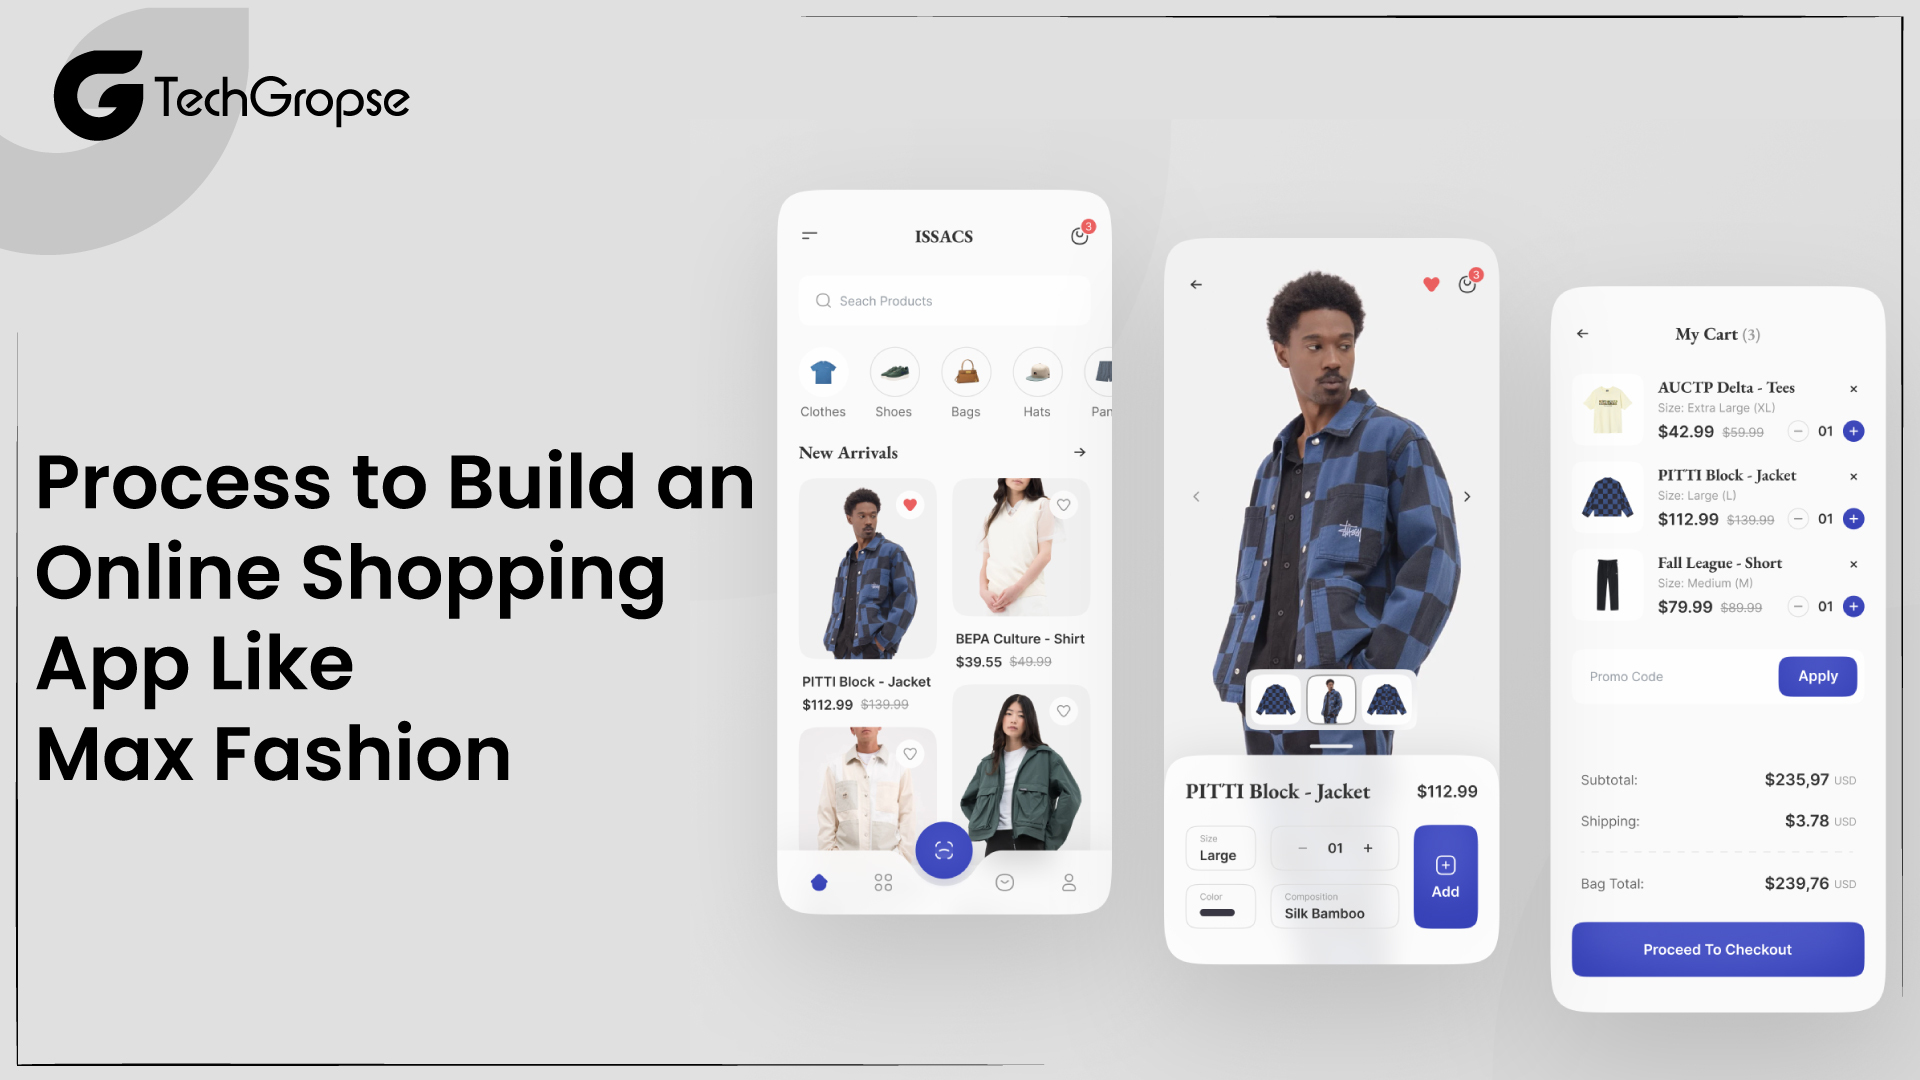 The Process to Build an Online Shopping App Like Max Fashion 